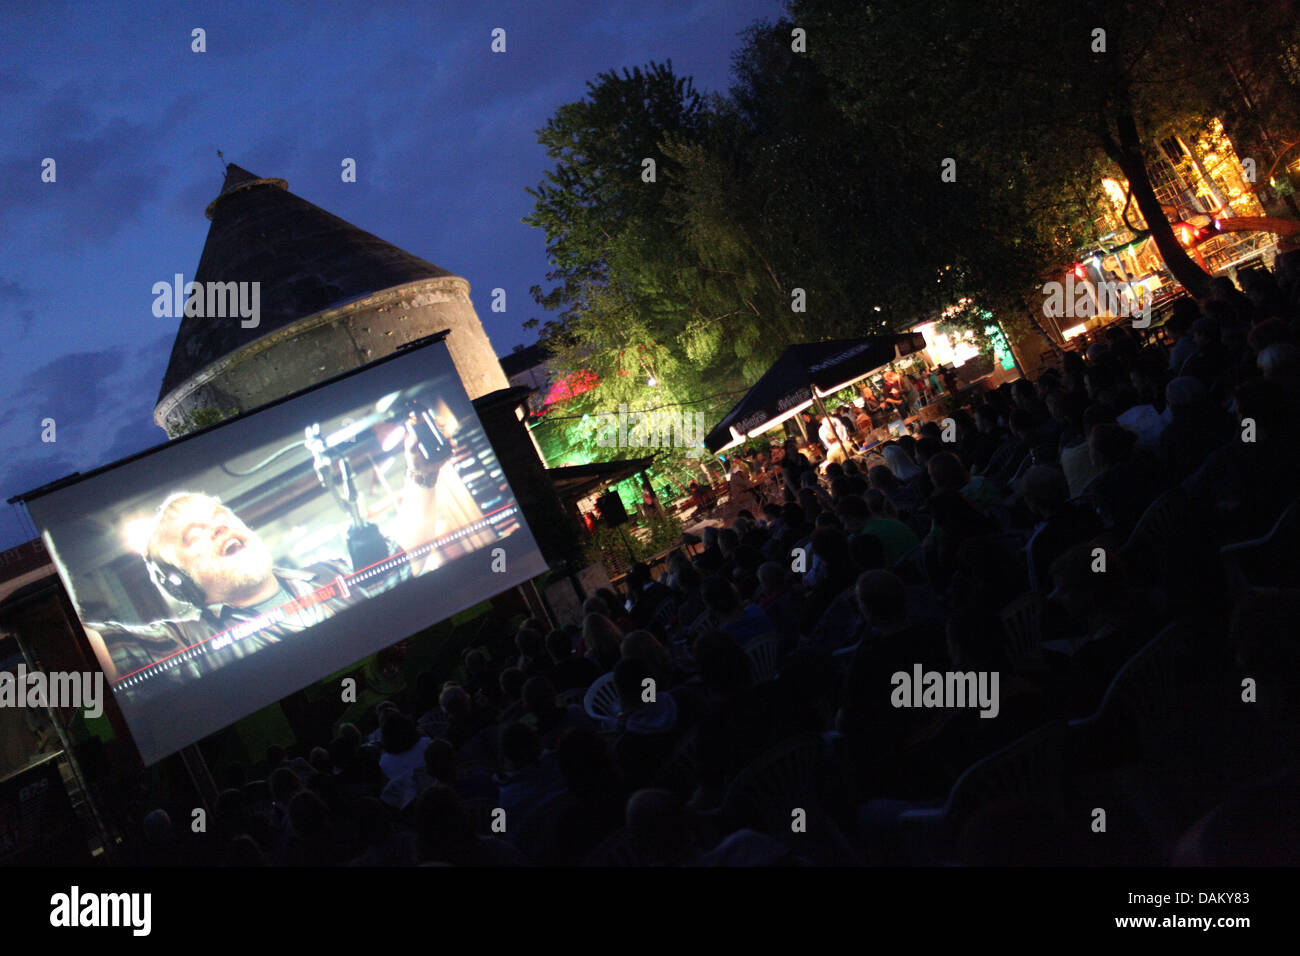 Guests watch 'Radio Rock Revolution' at the Club Cassiopeia in Berlin, Germany, 11 May 2011. With rising temperature, the open-air cinema season begins and lasts until autumn. Photo: Florian Schuh Stock Photo